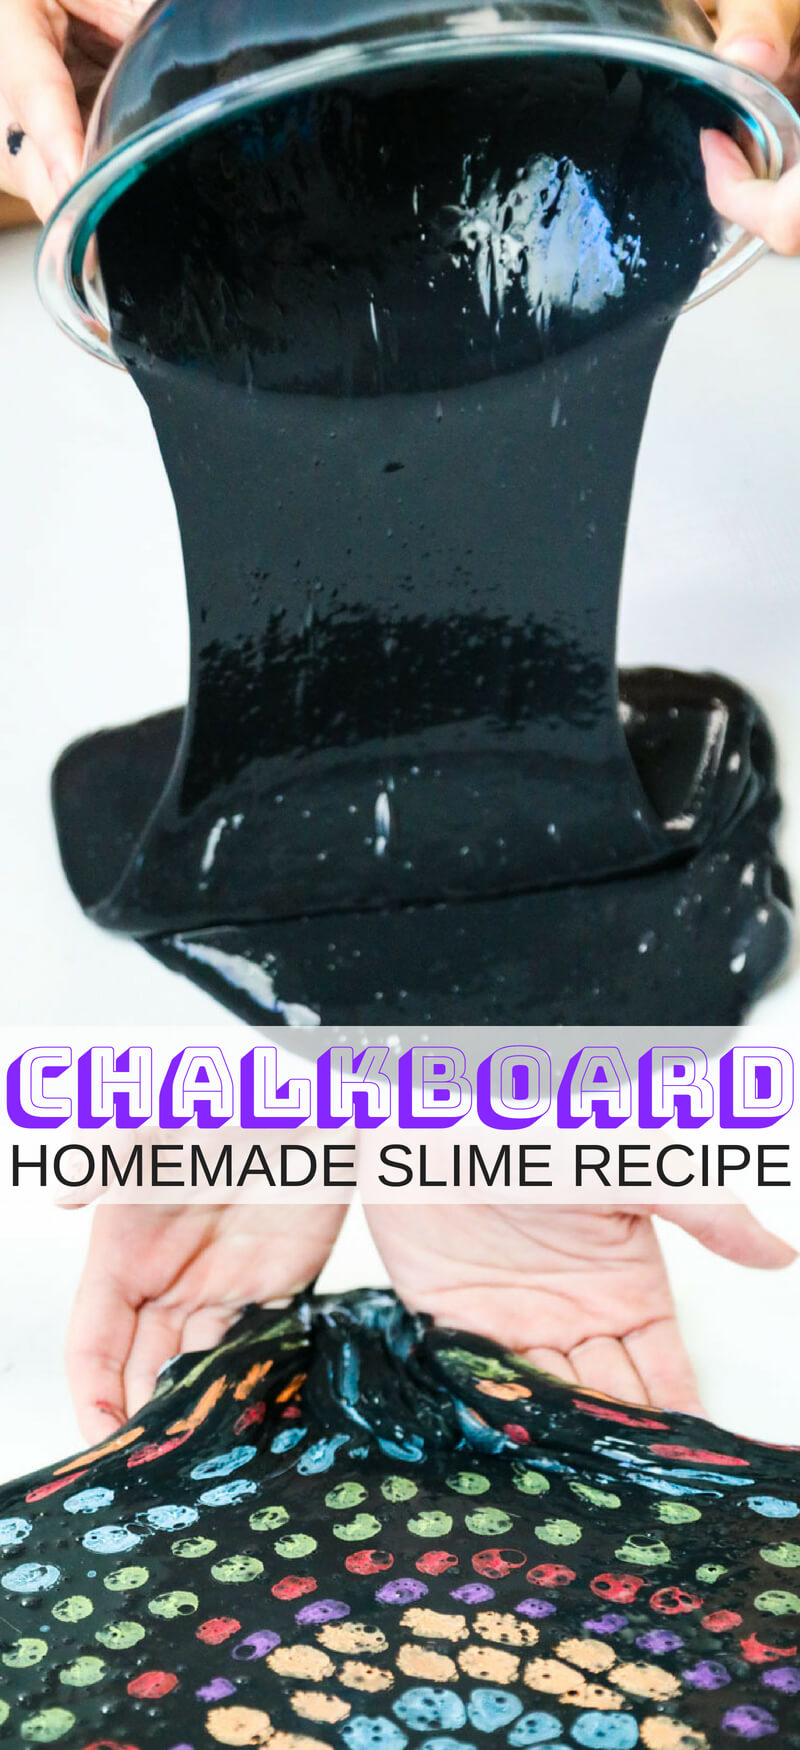 Learn how to make chalkboard slime for cool science and art in one activity. Easy slime recipe using any of our basic slime recipes including liquid starch slime, saline solution slime, or borax slime. Use chalk markers to decorate and play with your slime.